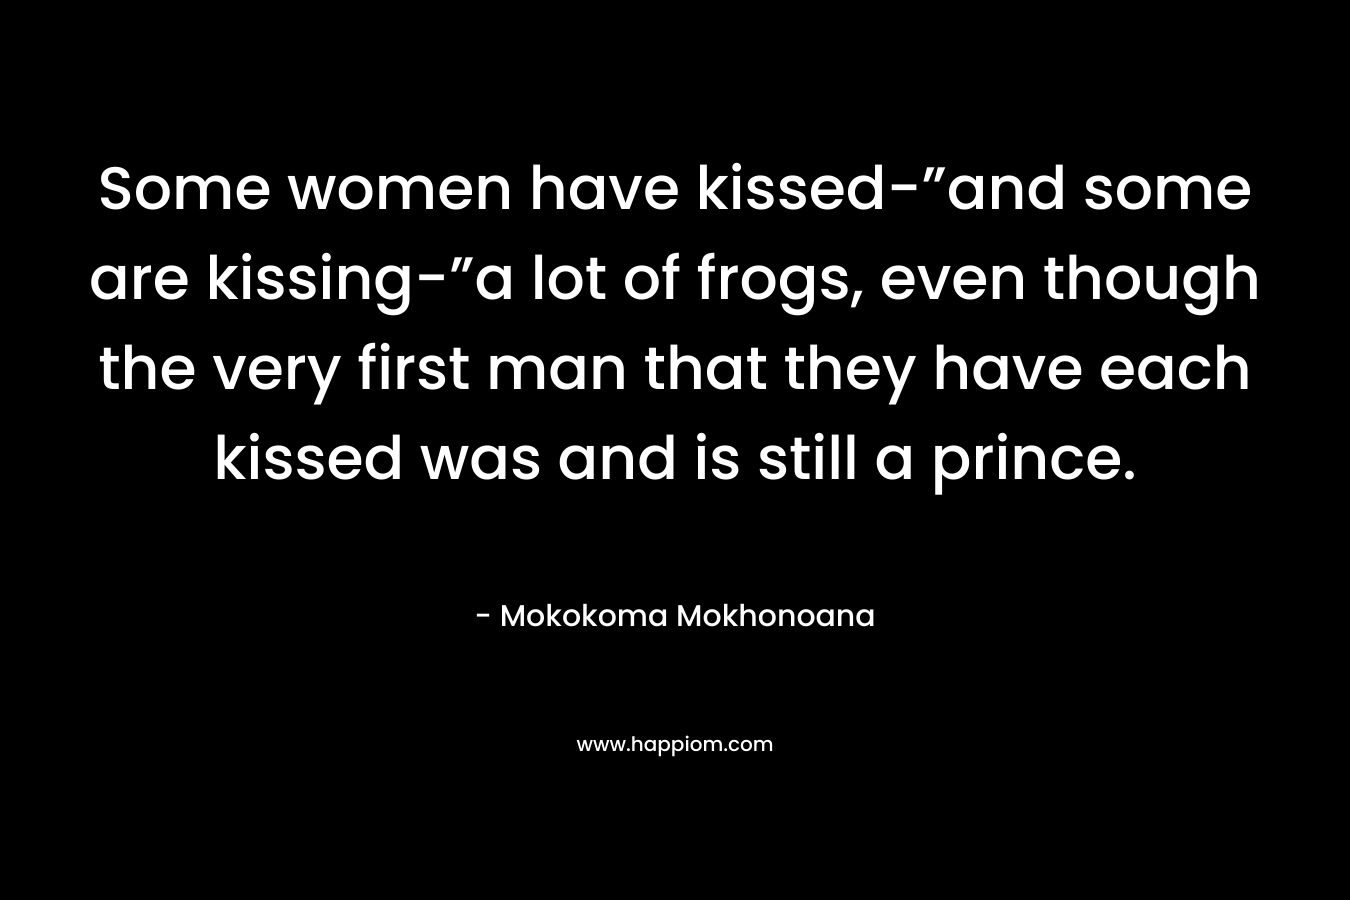 Some women have kissed-”and some are kissing-”a lot of frogs, even though the very first man that they have each kissed was and is still a prince. – Mokokoma Mokhonoana